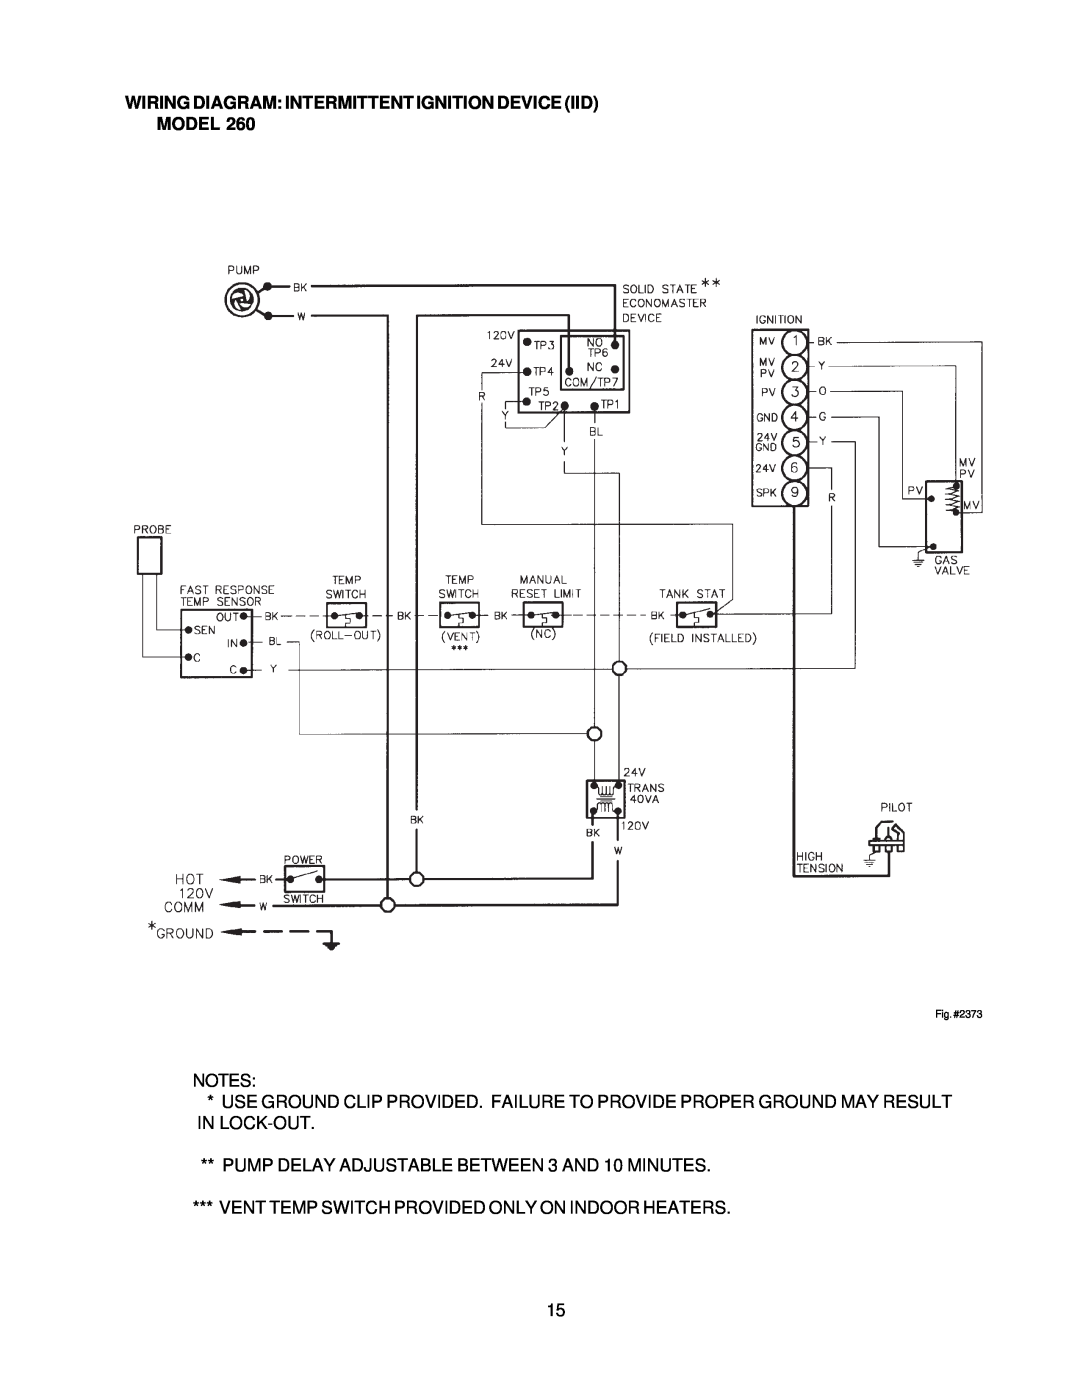 Raypak 260-401 Wiring Diagram Intermittent Ignition Device Iid, Model, PUMP DELAY ADJUSTABLE BETWEEN 3 AND 10 MINUTES 